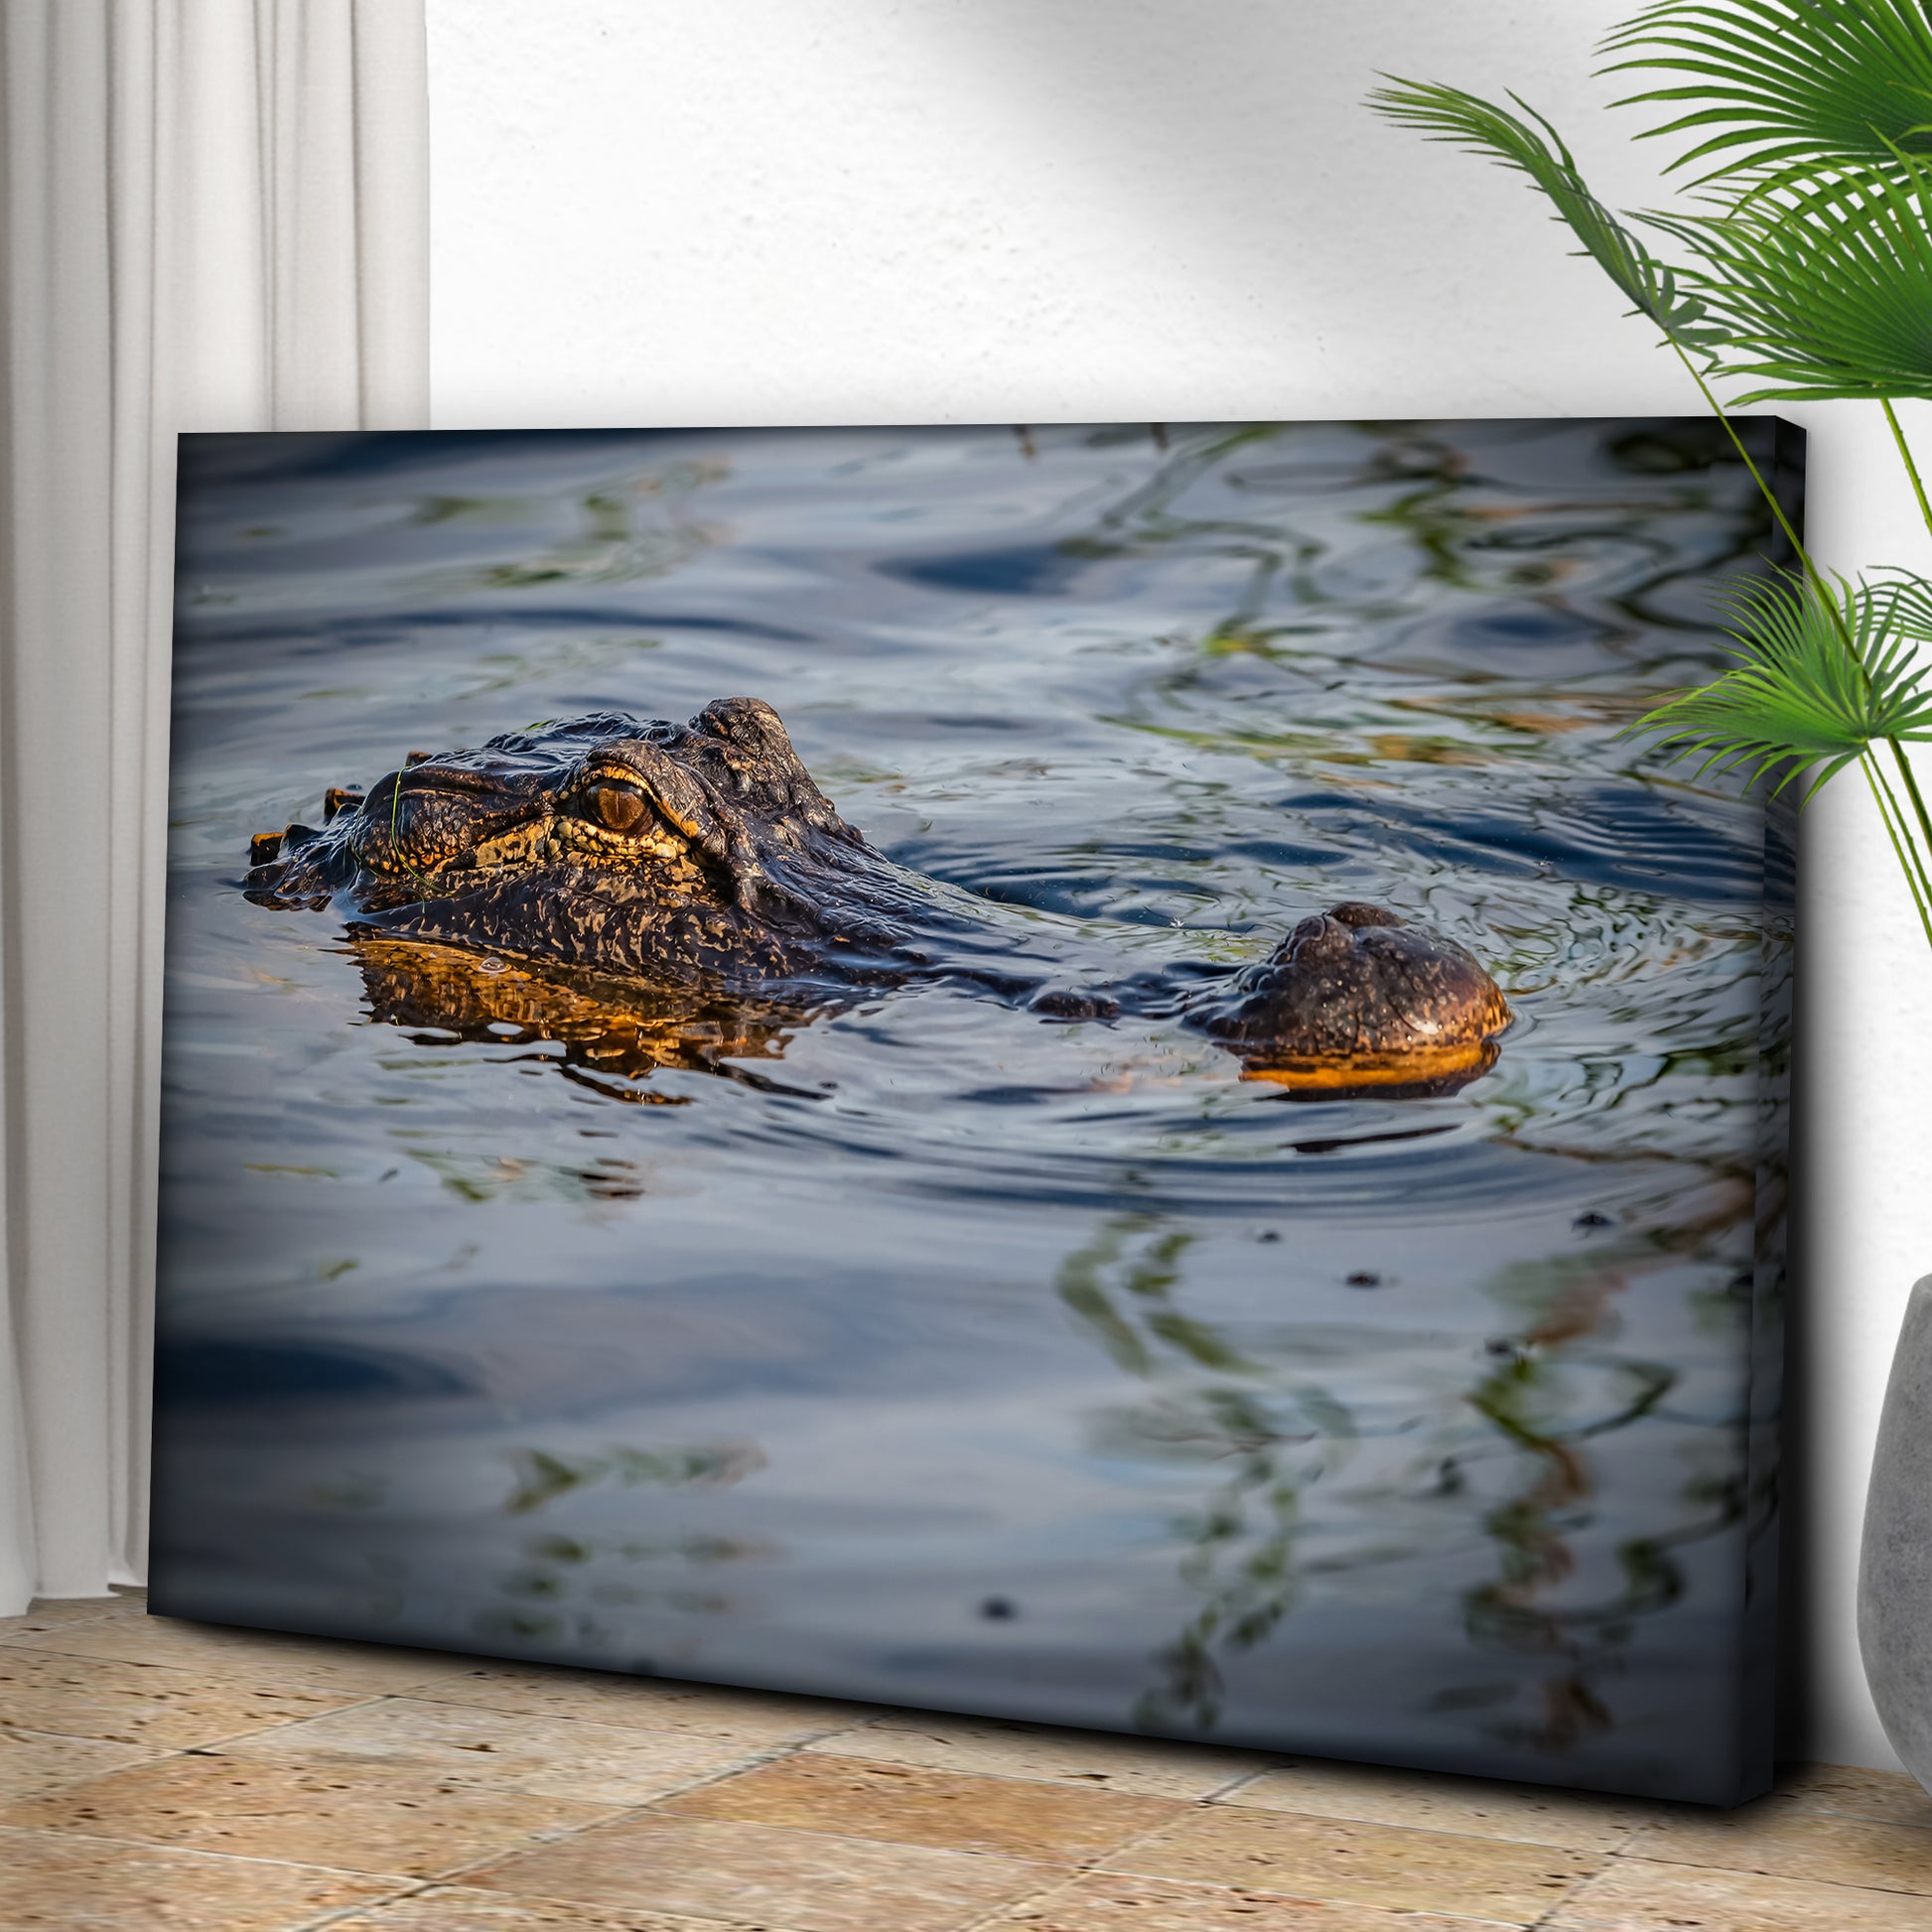 Reptile Alligator Peeking Canvas Wall Art Style 2 - Image by Tailored Canvases